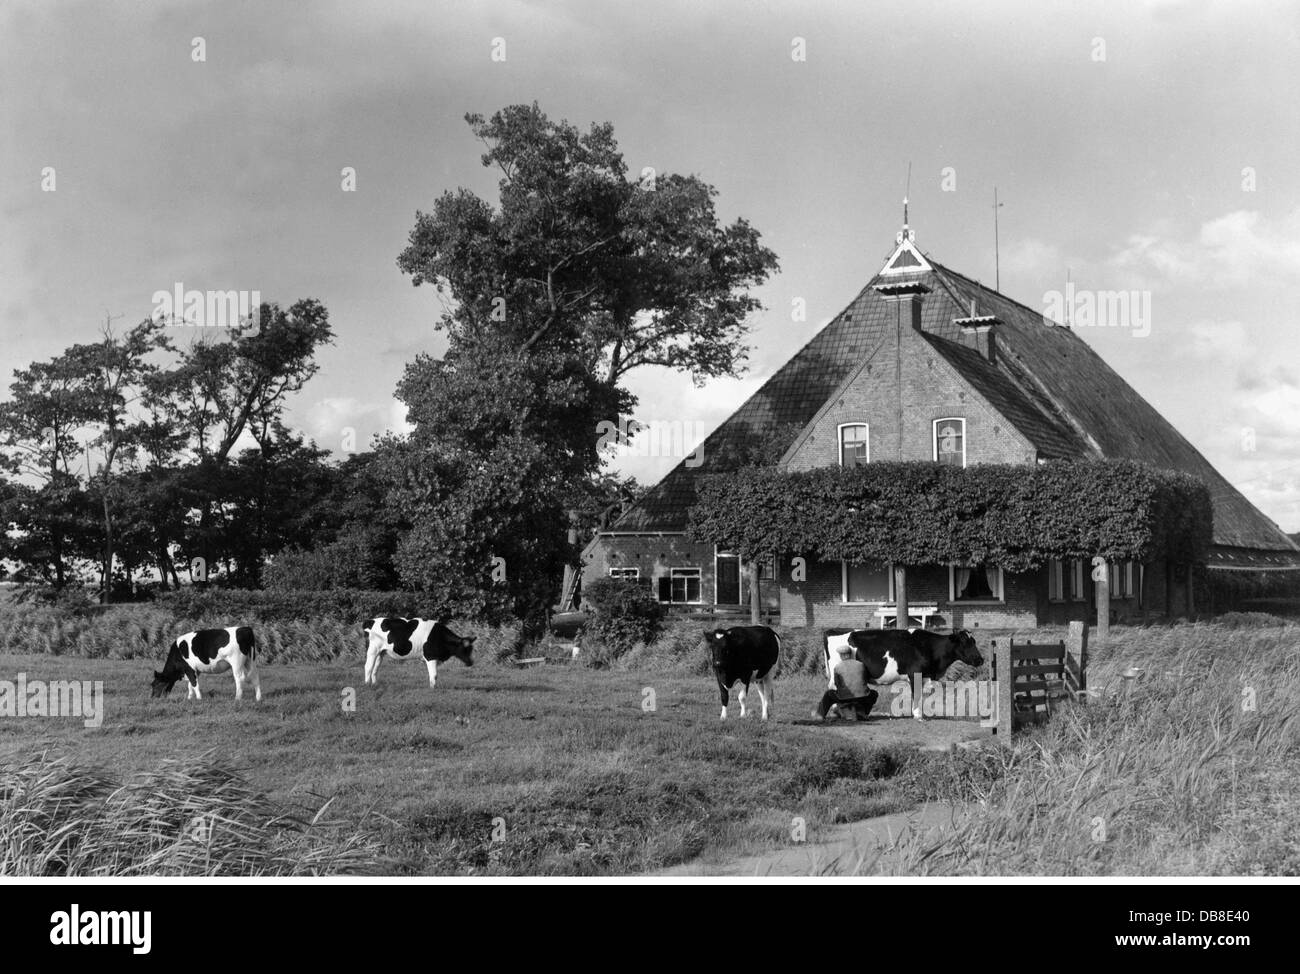 agriculture, farm, farm with dairy farming, Friesland, 20th century, 20th century, Netherlands, building, buildings, exterior view, farmer, farmers, cows, dairy cattle, livestock farming, stock farming, animal husbandry, keeping of animals, cattle industry, livestock production, cow, bull, domestic cattle, cattle, cattle breeding, cattle farming, cattle rearing, livestock, live stock, food, foodstuff, milk, dairy farming, agriculture, farming, farm, farms, historic, historical, male, man, men, Additional-Rights-Clearences-Not Available Stock Photo